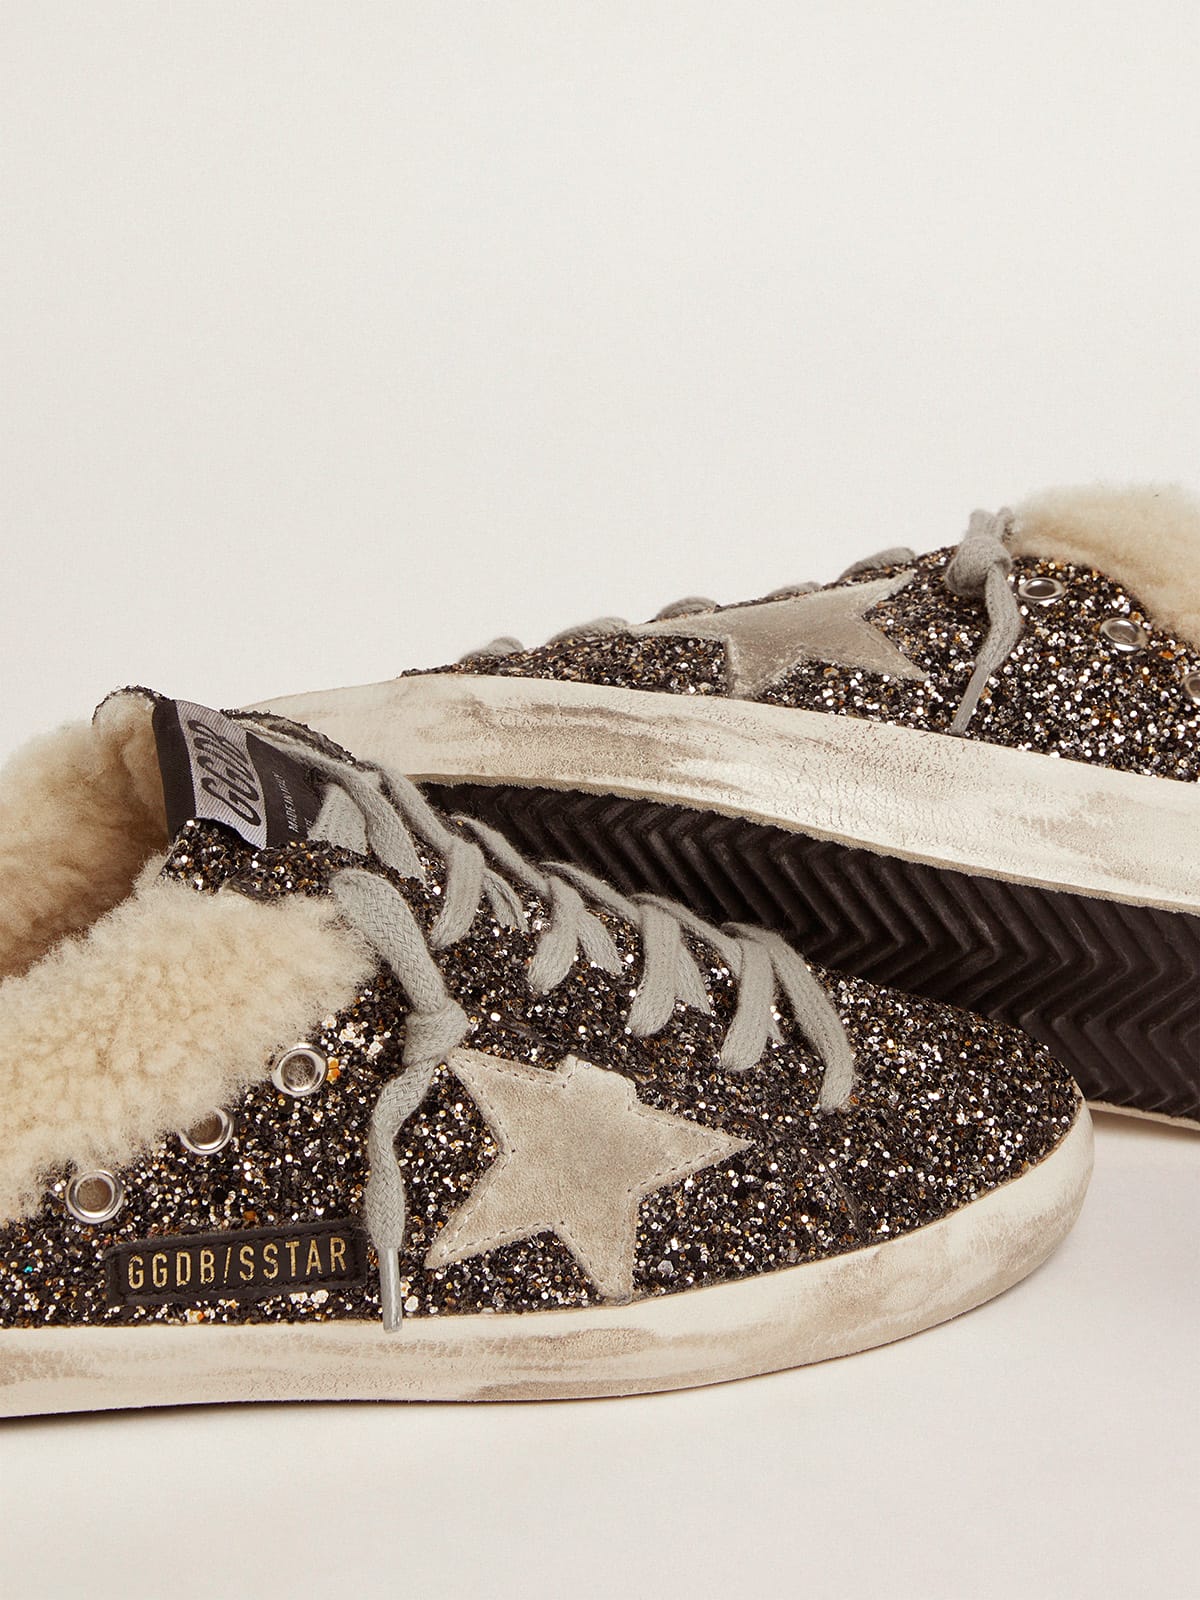 Women's Super-Star Sabot with glitter and shearling interior | Golden Goose